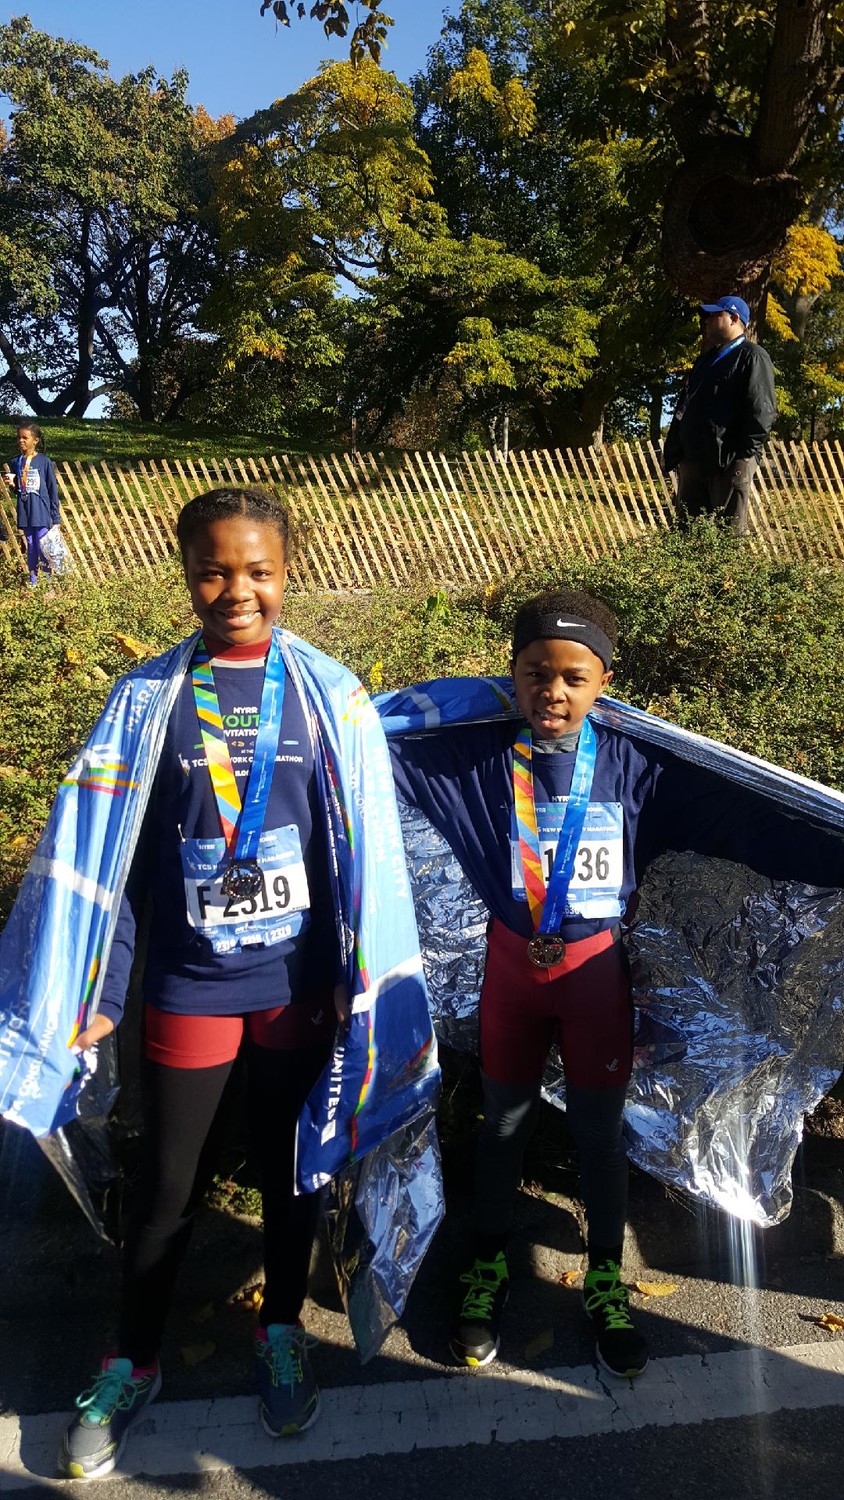 Abigail and Adam Jefferies ran in the junior New York Marathon last year, and plan to do so again on Nov. 6.